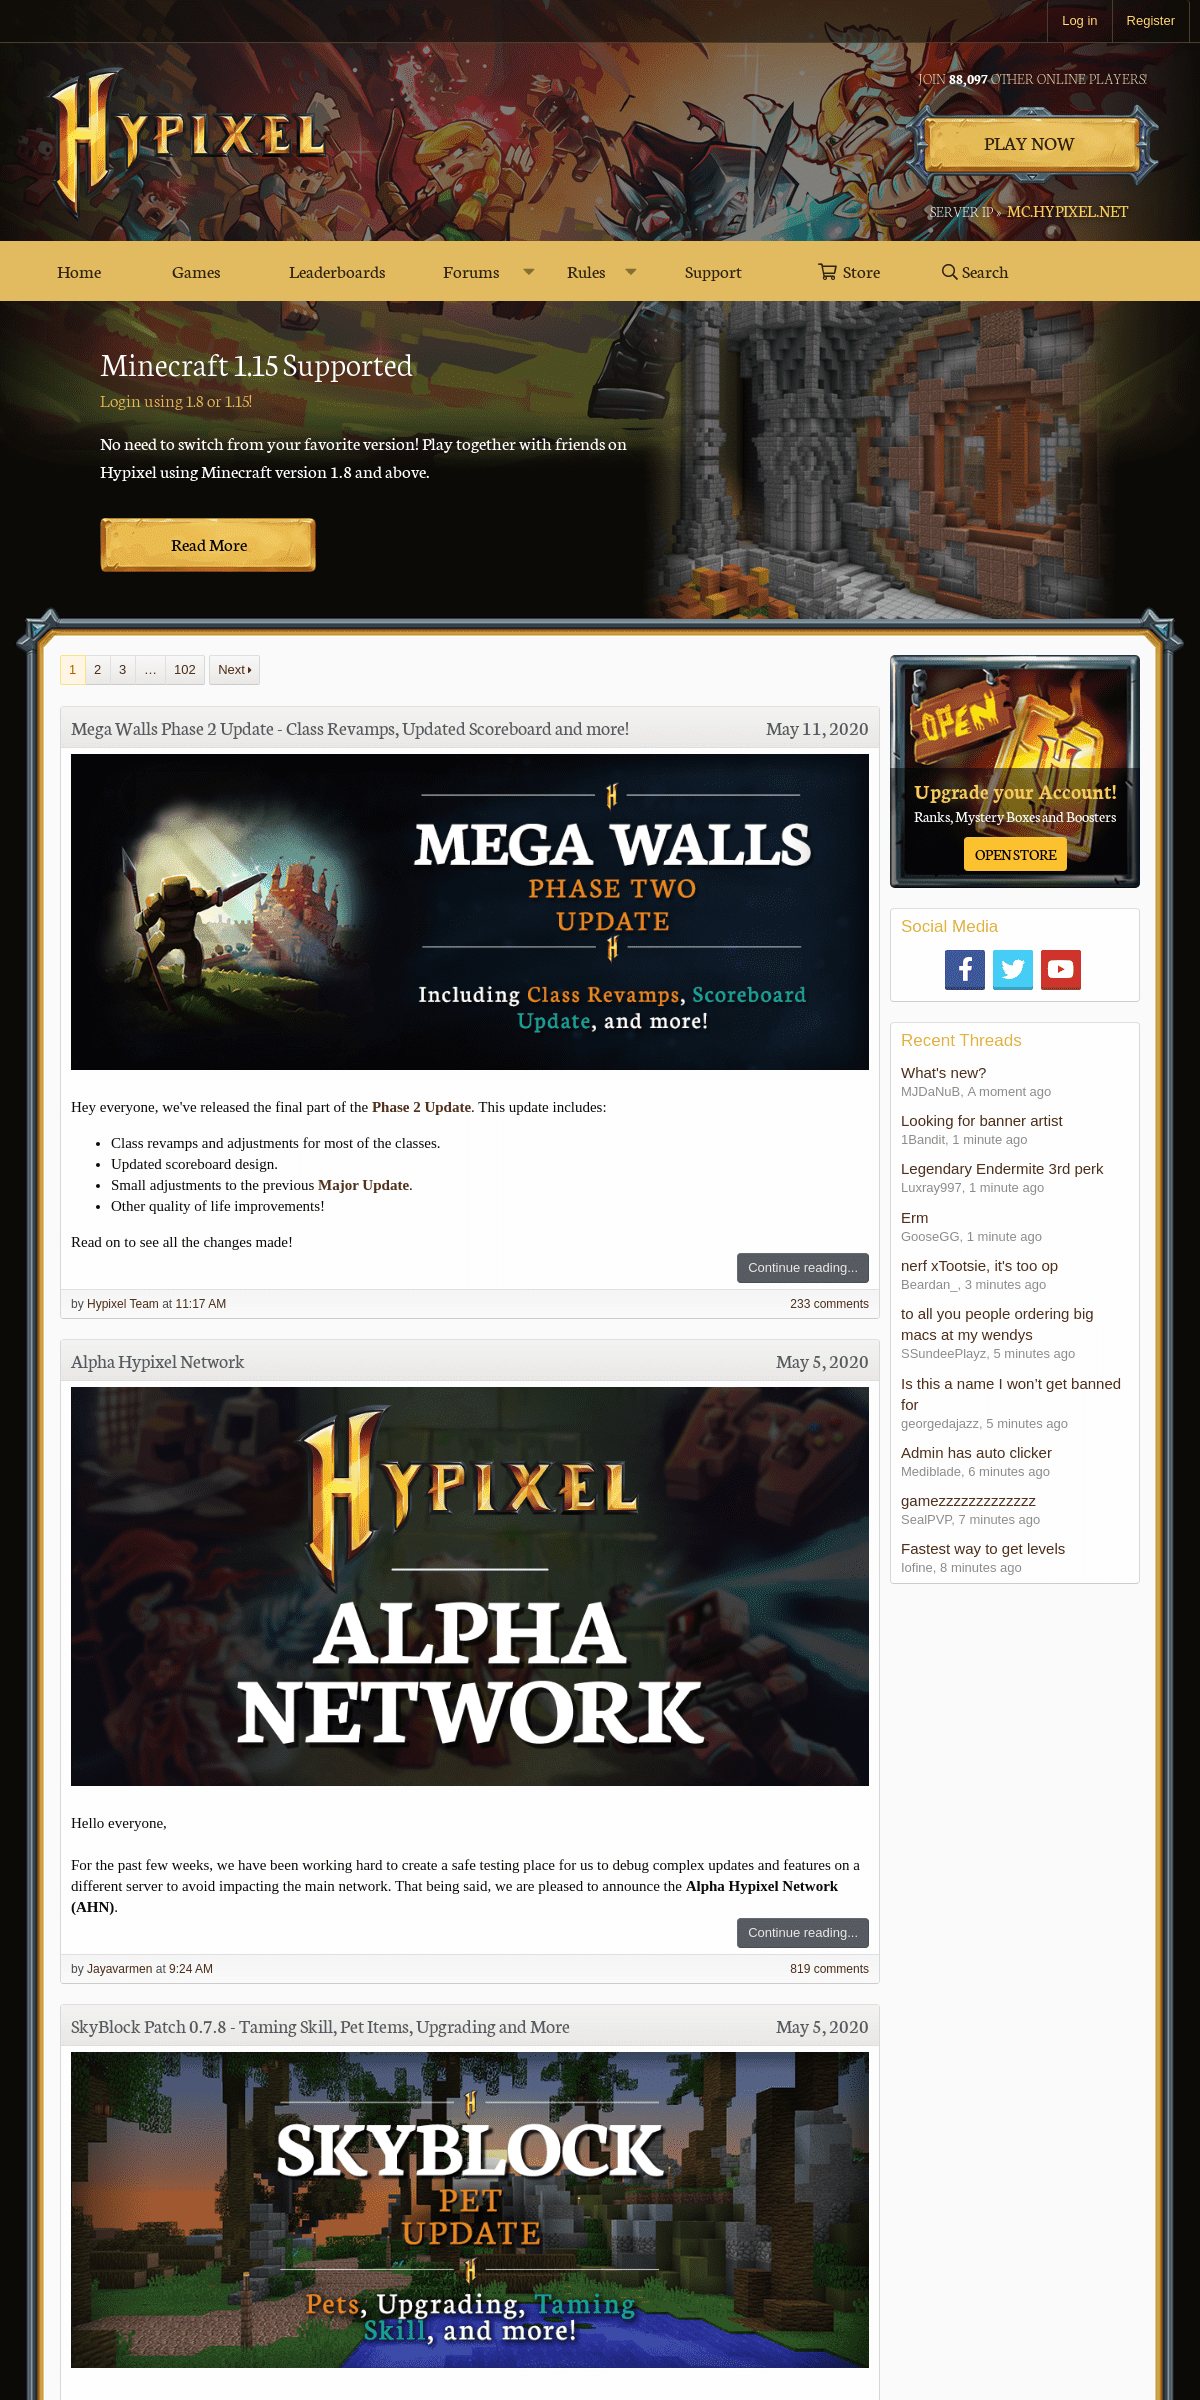 A complete backup of hypixel.net